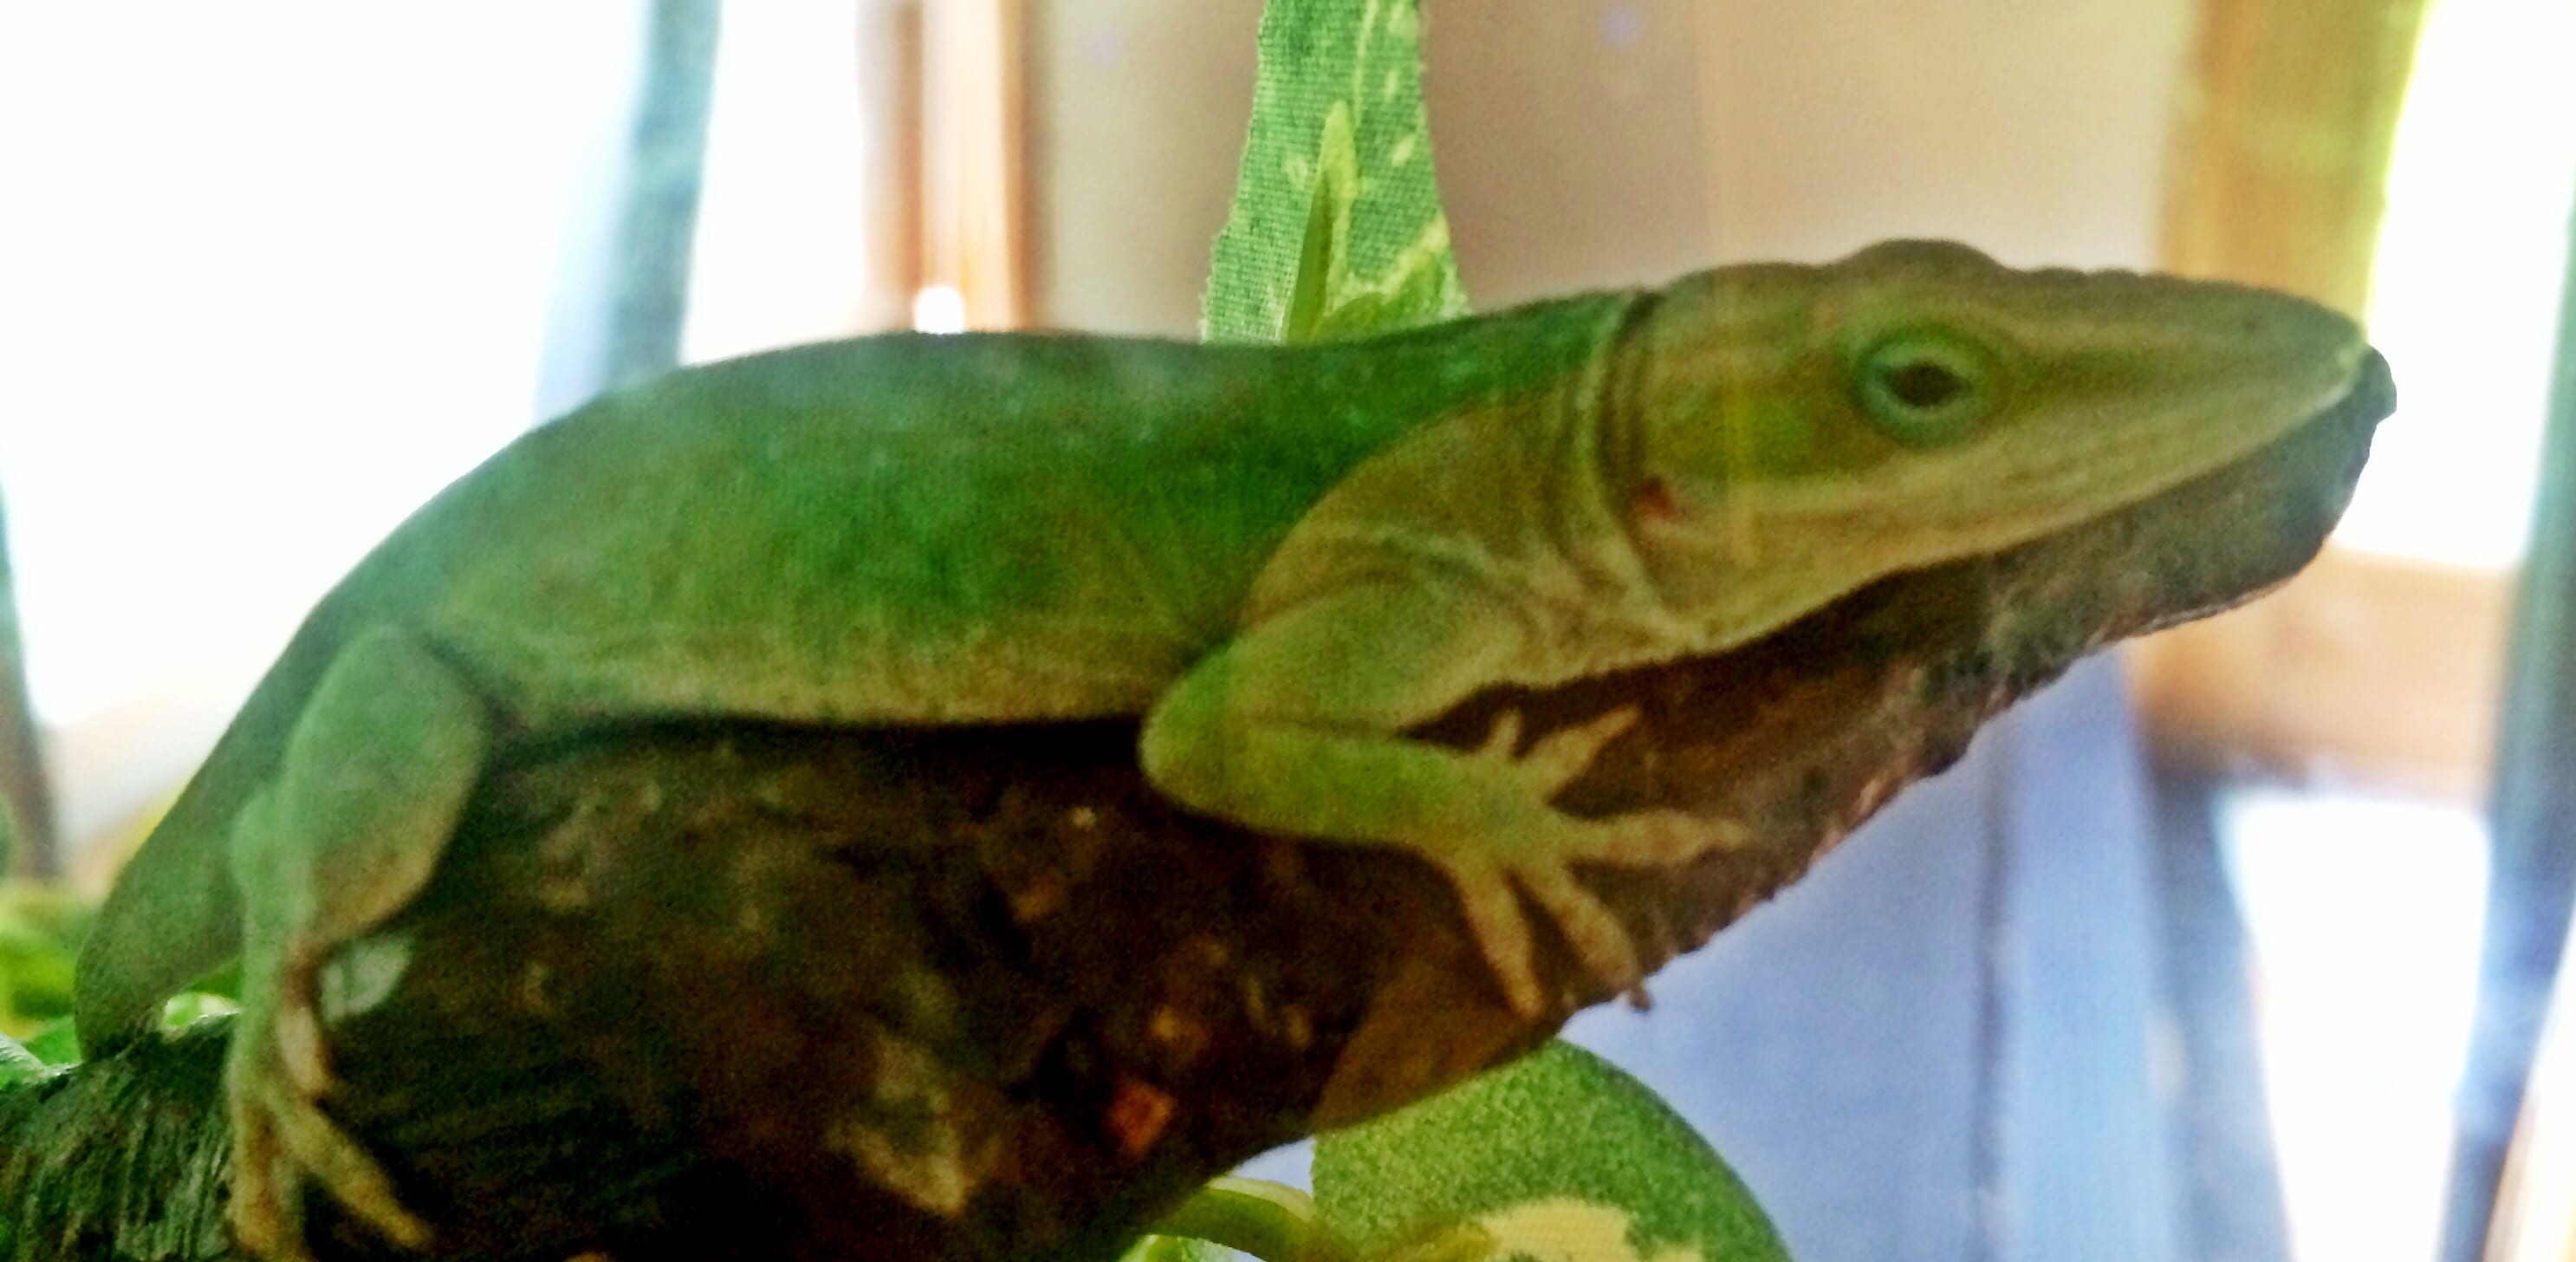 Daniel’s green lizard just chilling out…